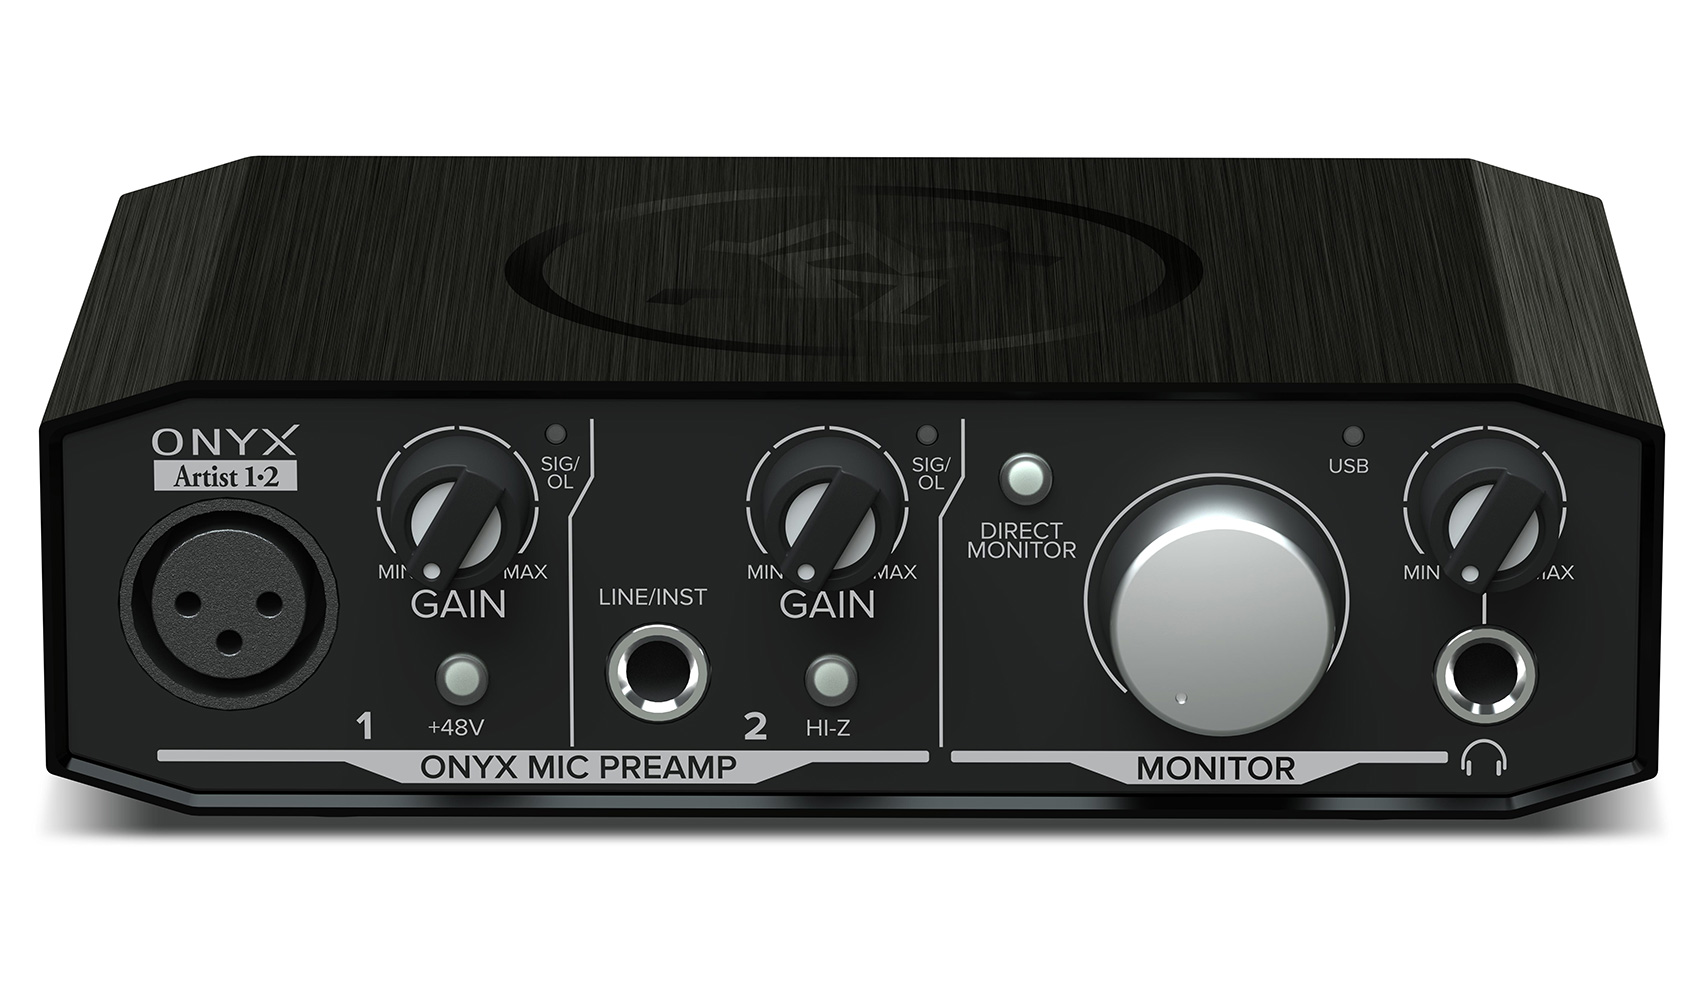 Mackie Onyx Artist 1.2 2x2 USB Audio Recording Studio Interface and Stand - image 3 of 11